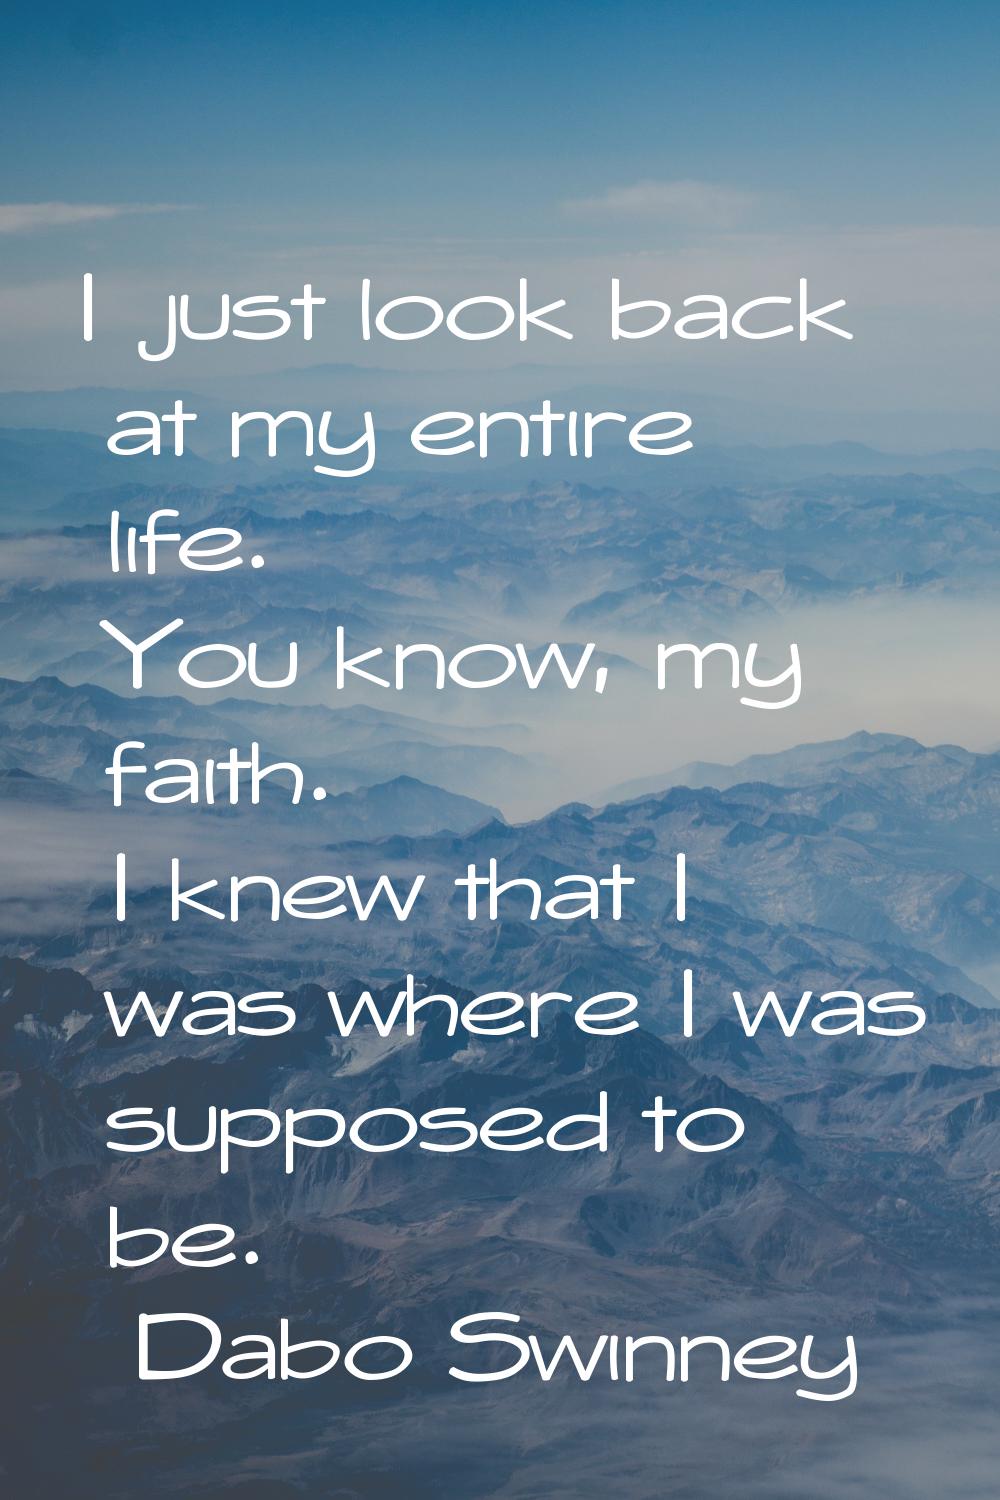 I just look back at my entire life. You know, my faith. I knew that I was where I was supposed to b